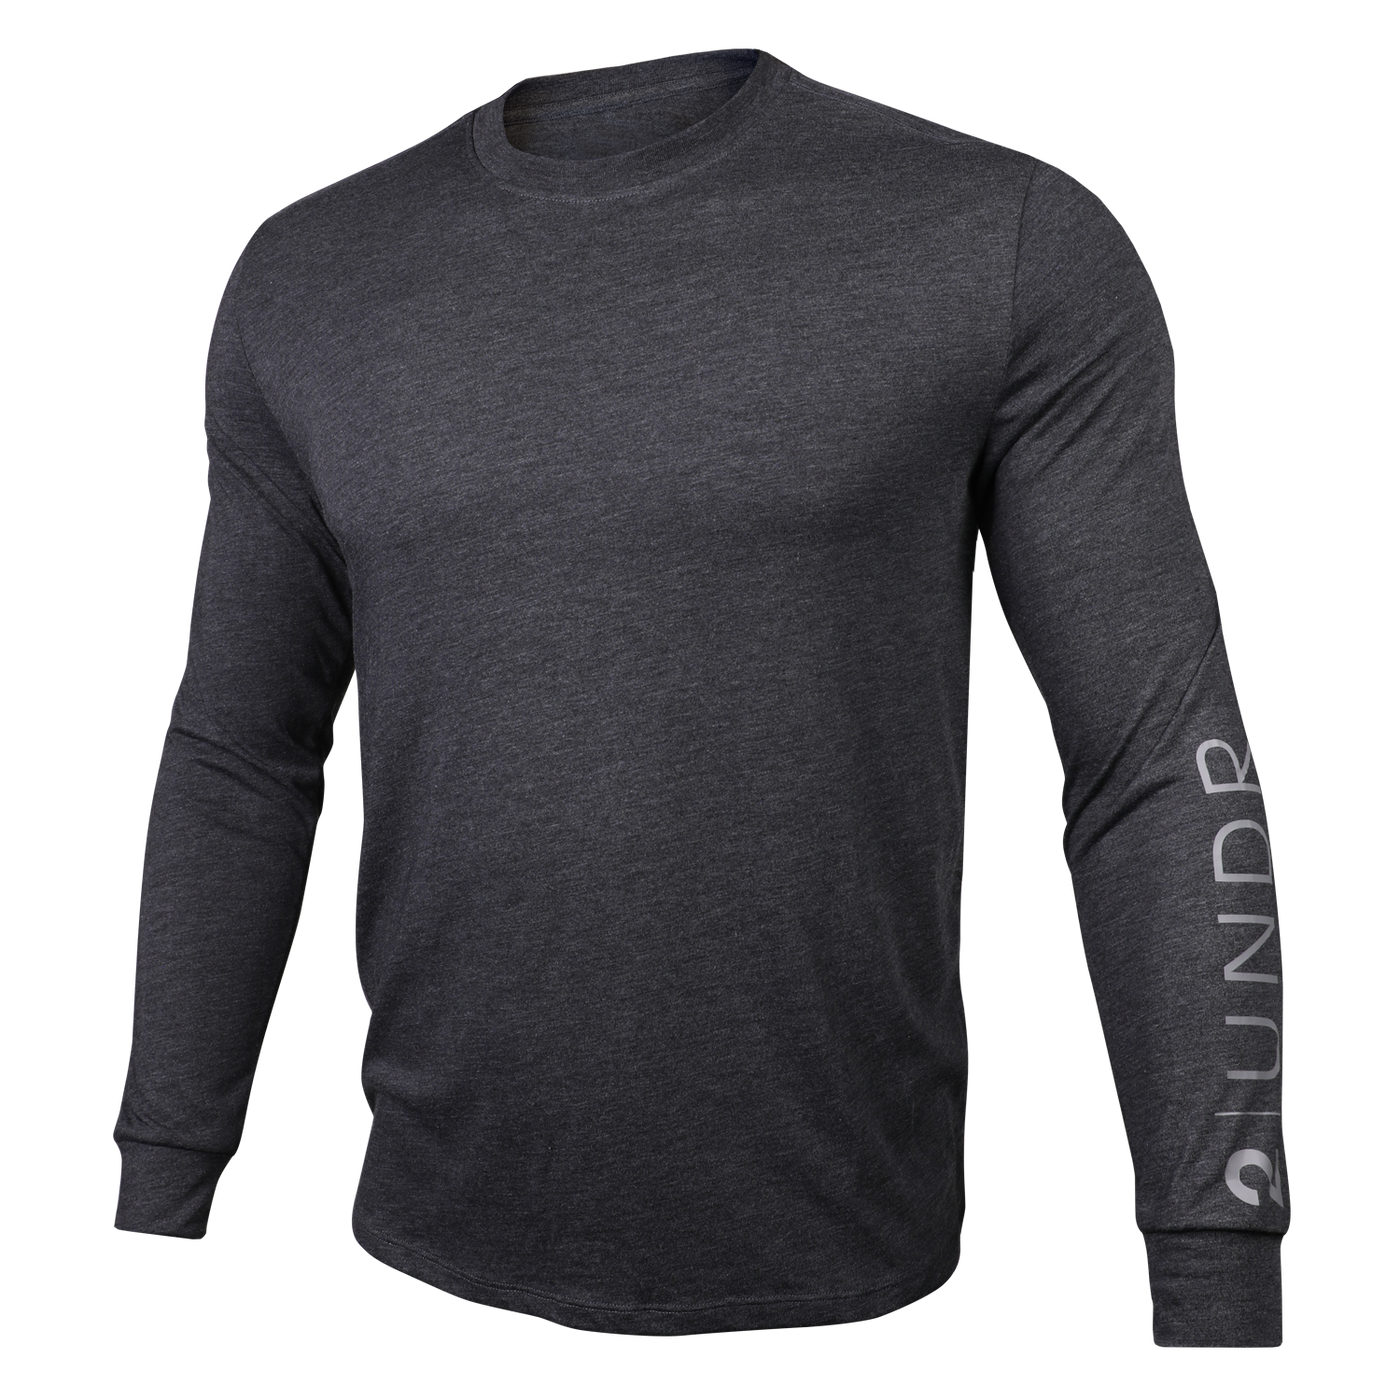 Branded All Day Long Sleeve Crew Tee - Heathered Charcoal